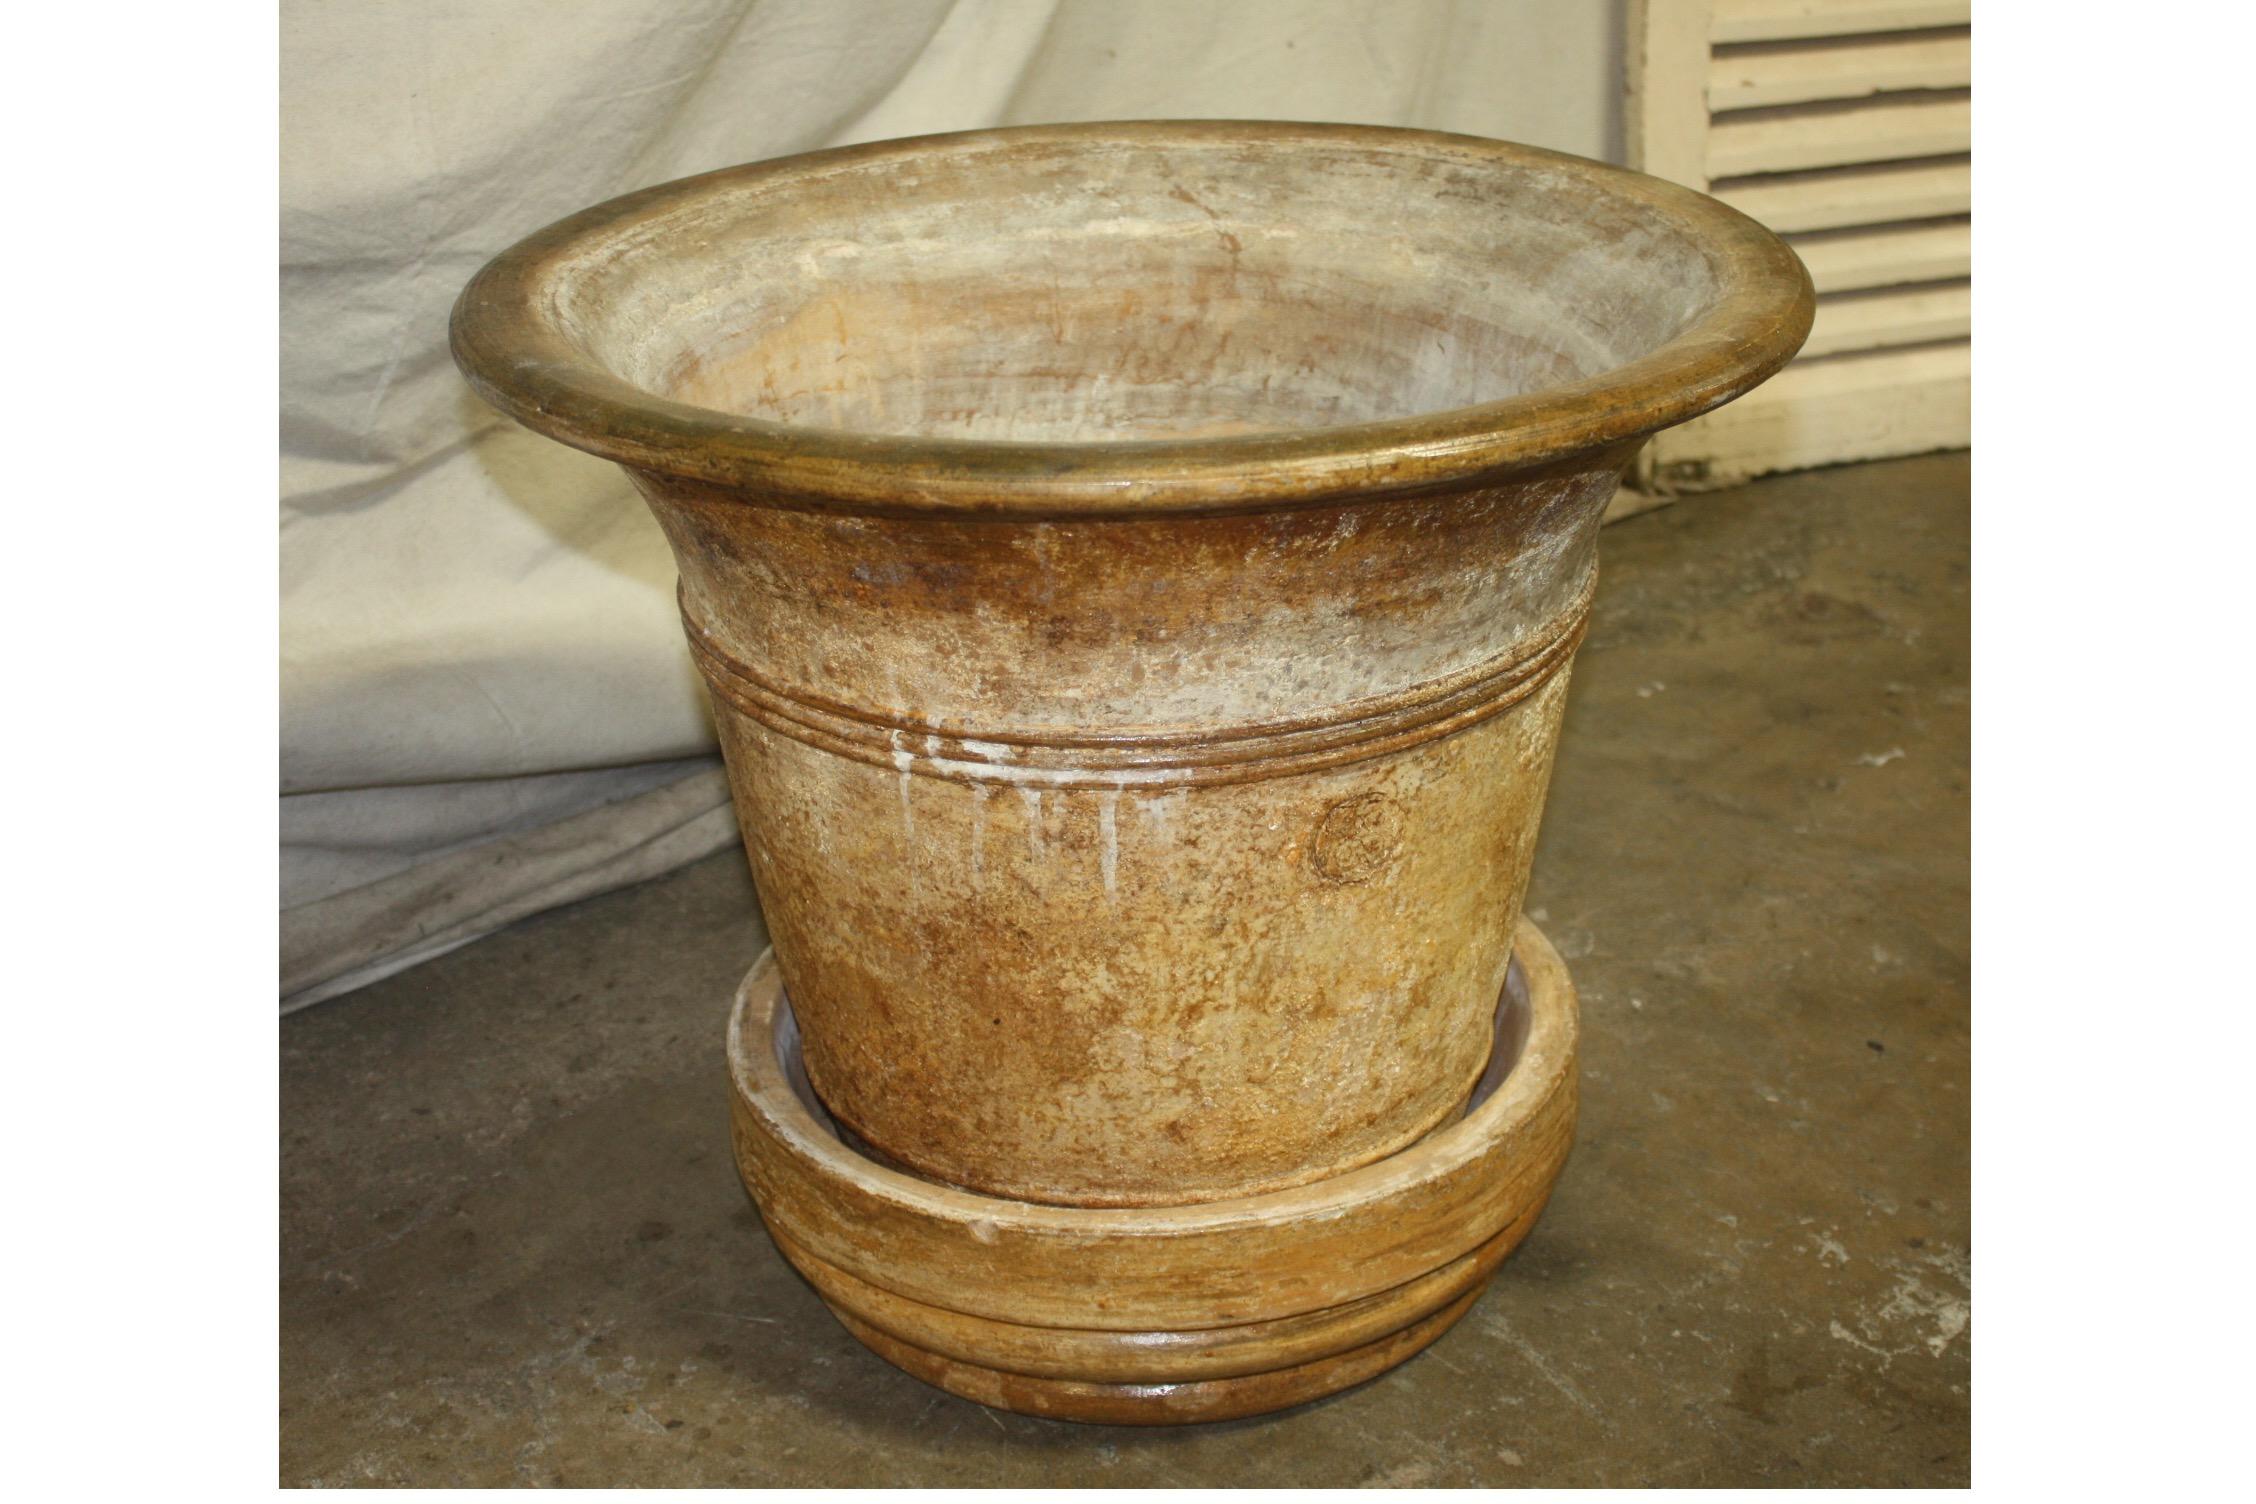 Early 20th Century French Terracotta Planter In Good Condition For Sale In Stockbridge, GA